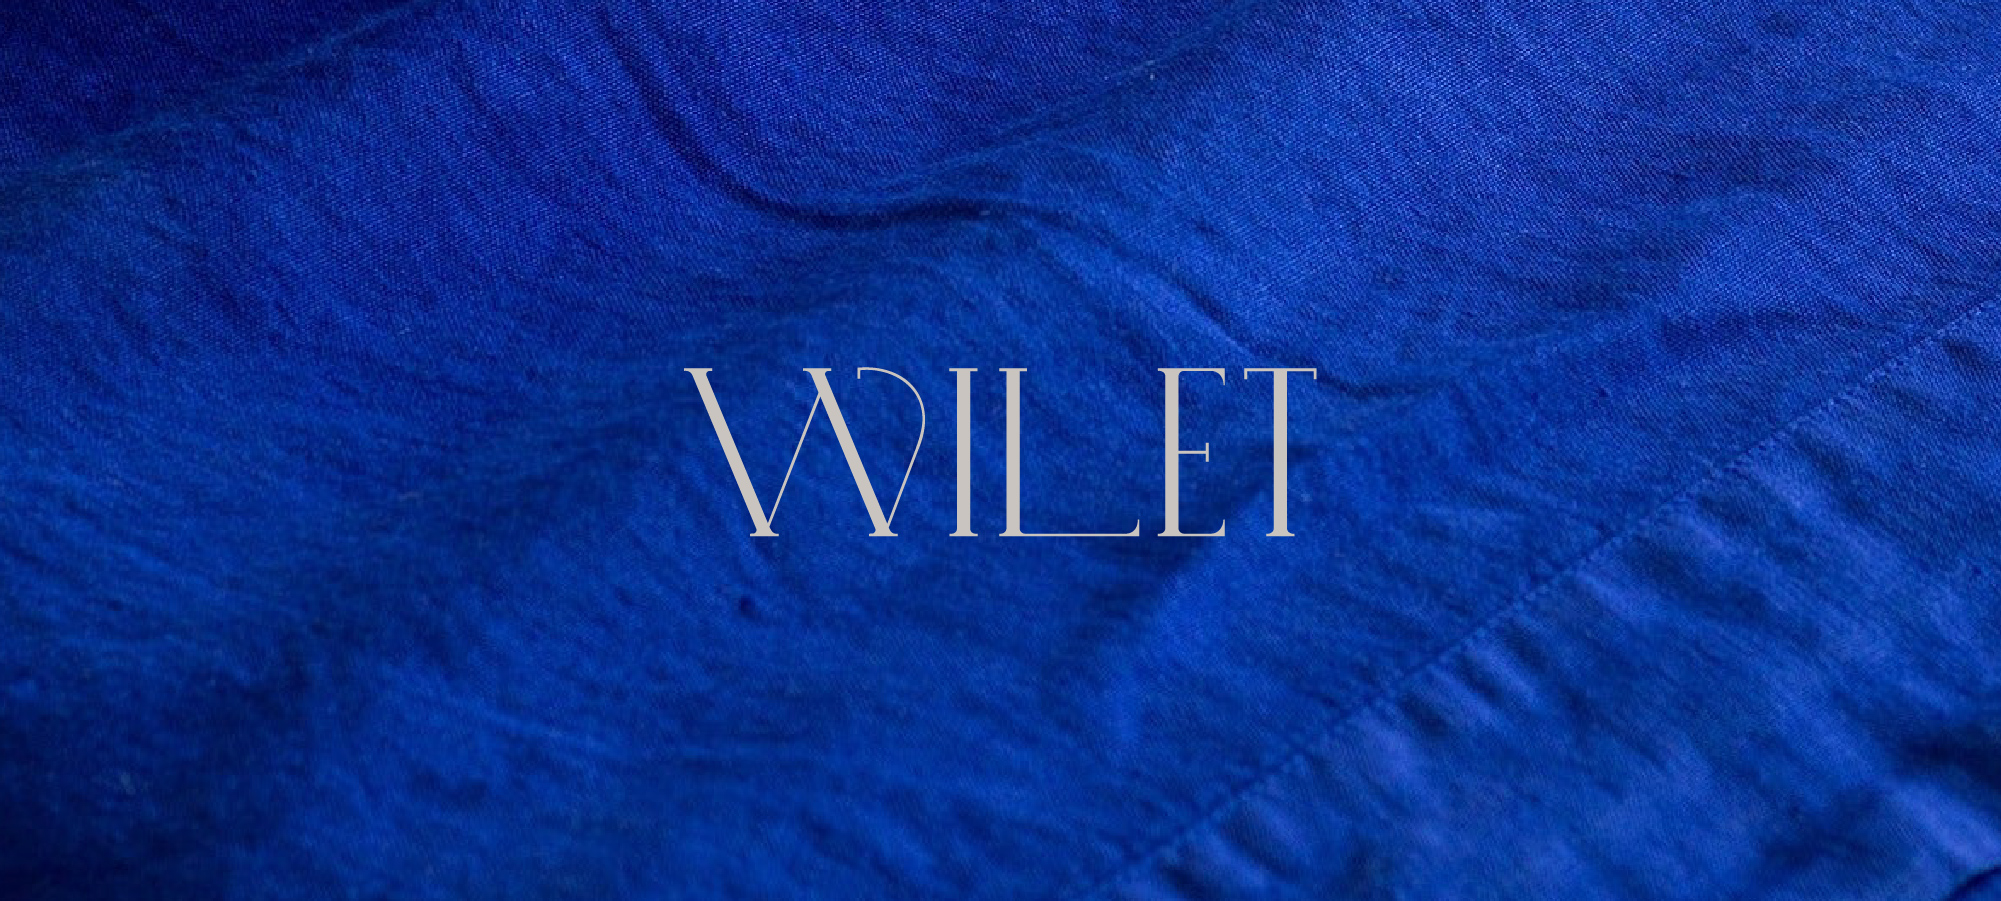 Welcome Wilet Rebrand of Canadian Linen Legacy